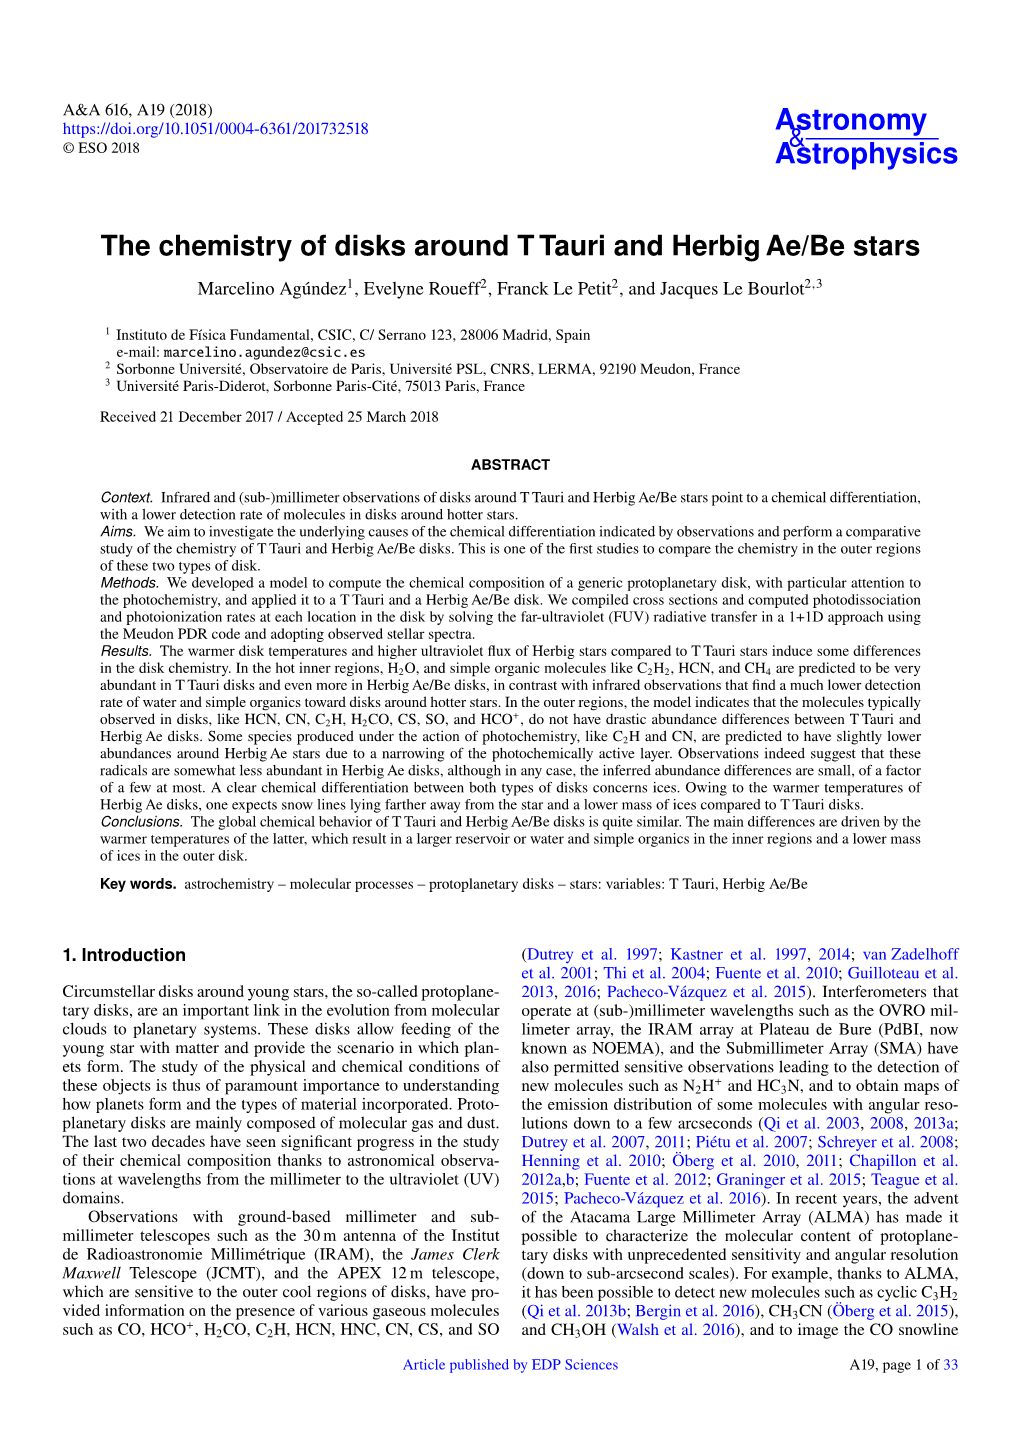 The Chemistry of Disks Around T Tauri and Herbig Ae/Be Stars Marcelino Agúndez1, Evelyne Roueff2, Franck Le Petit2, and Jacques Le Bourlot2,3